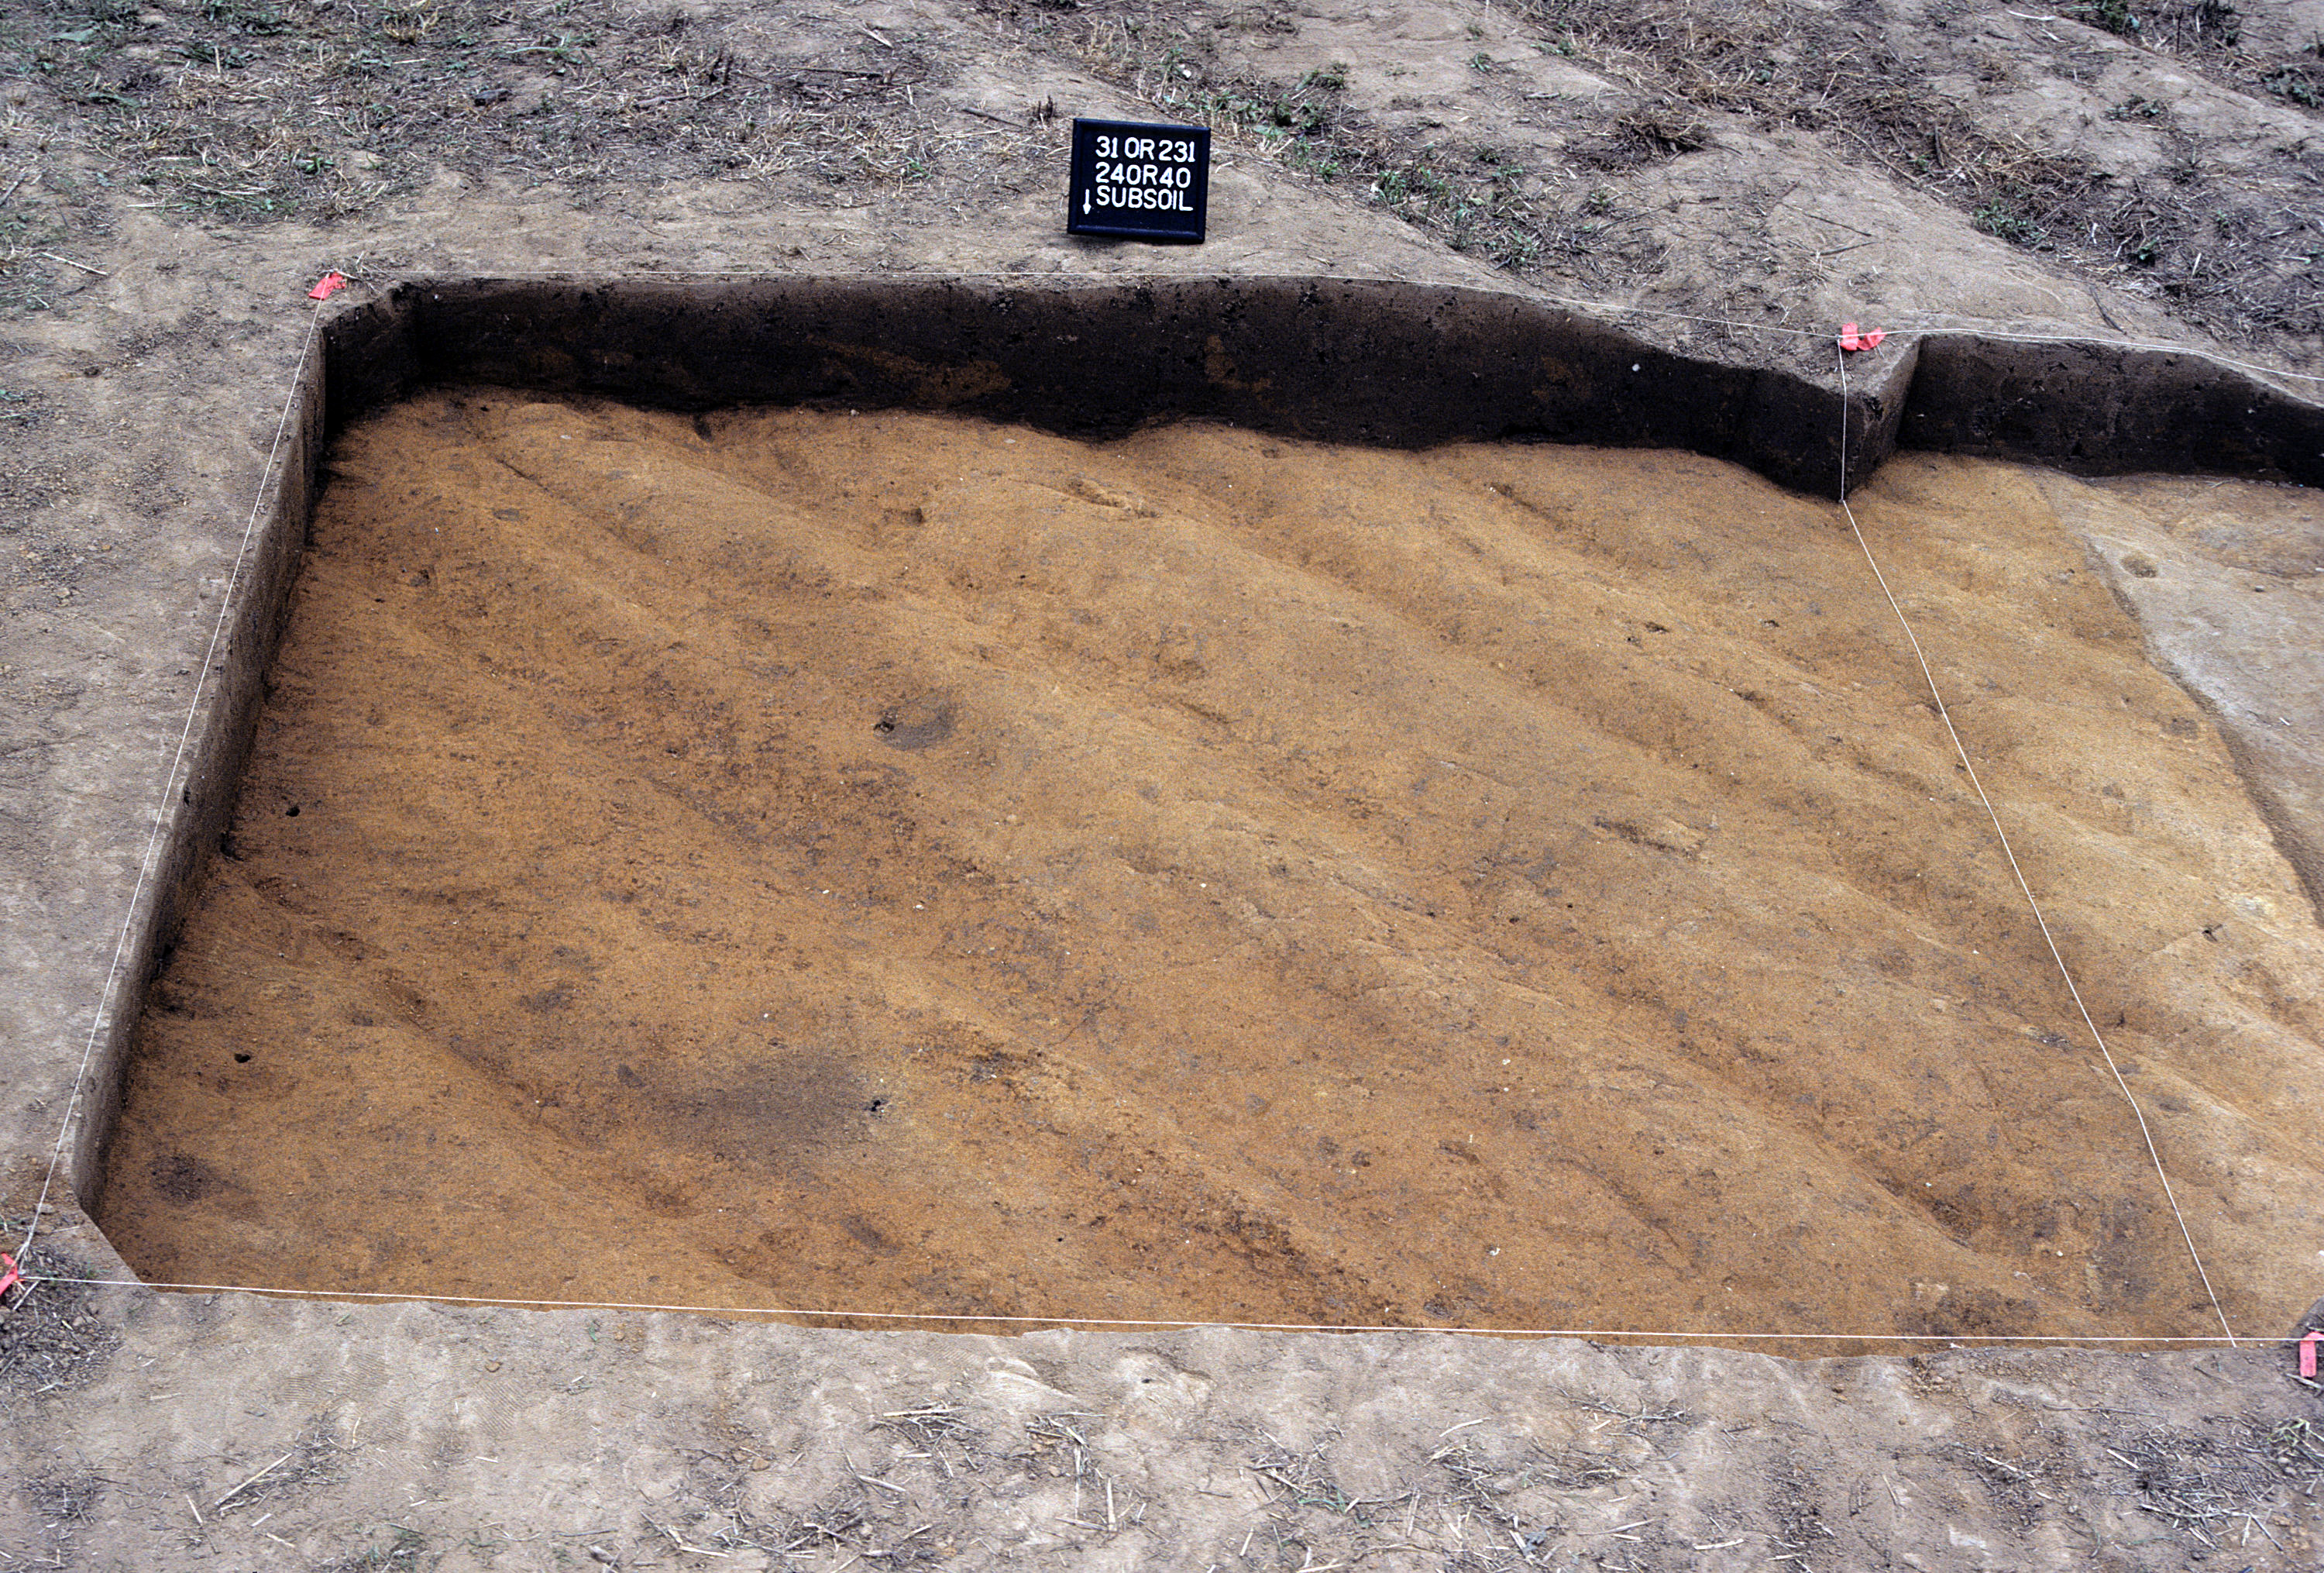 Figure 855. Sq. 240R40 at top of subsoil (view to south).